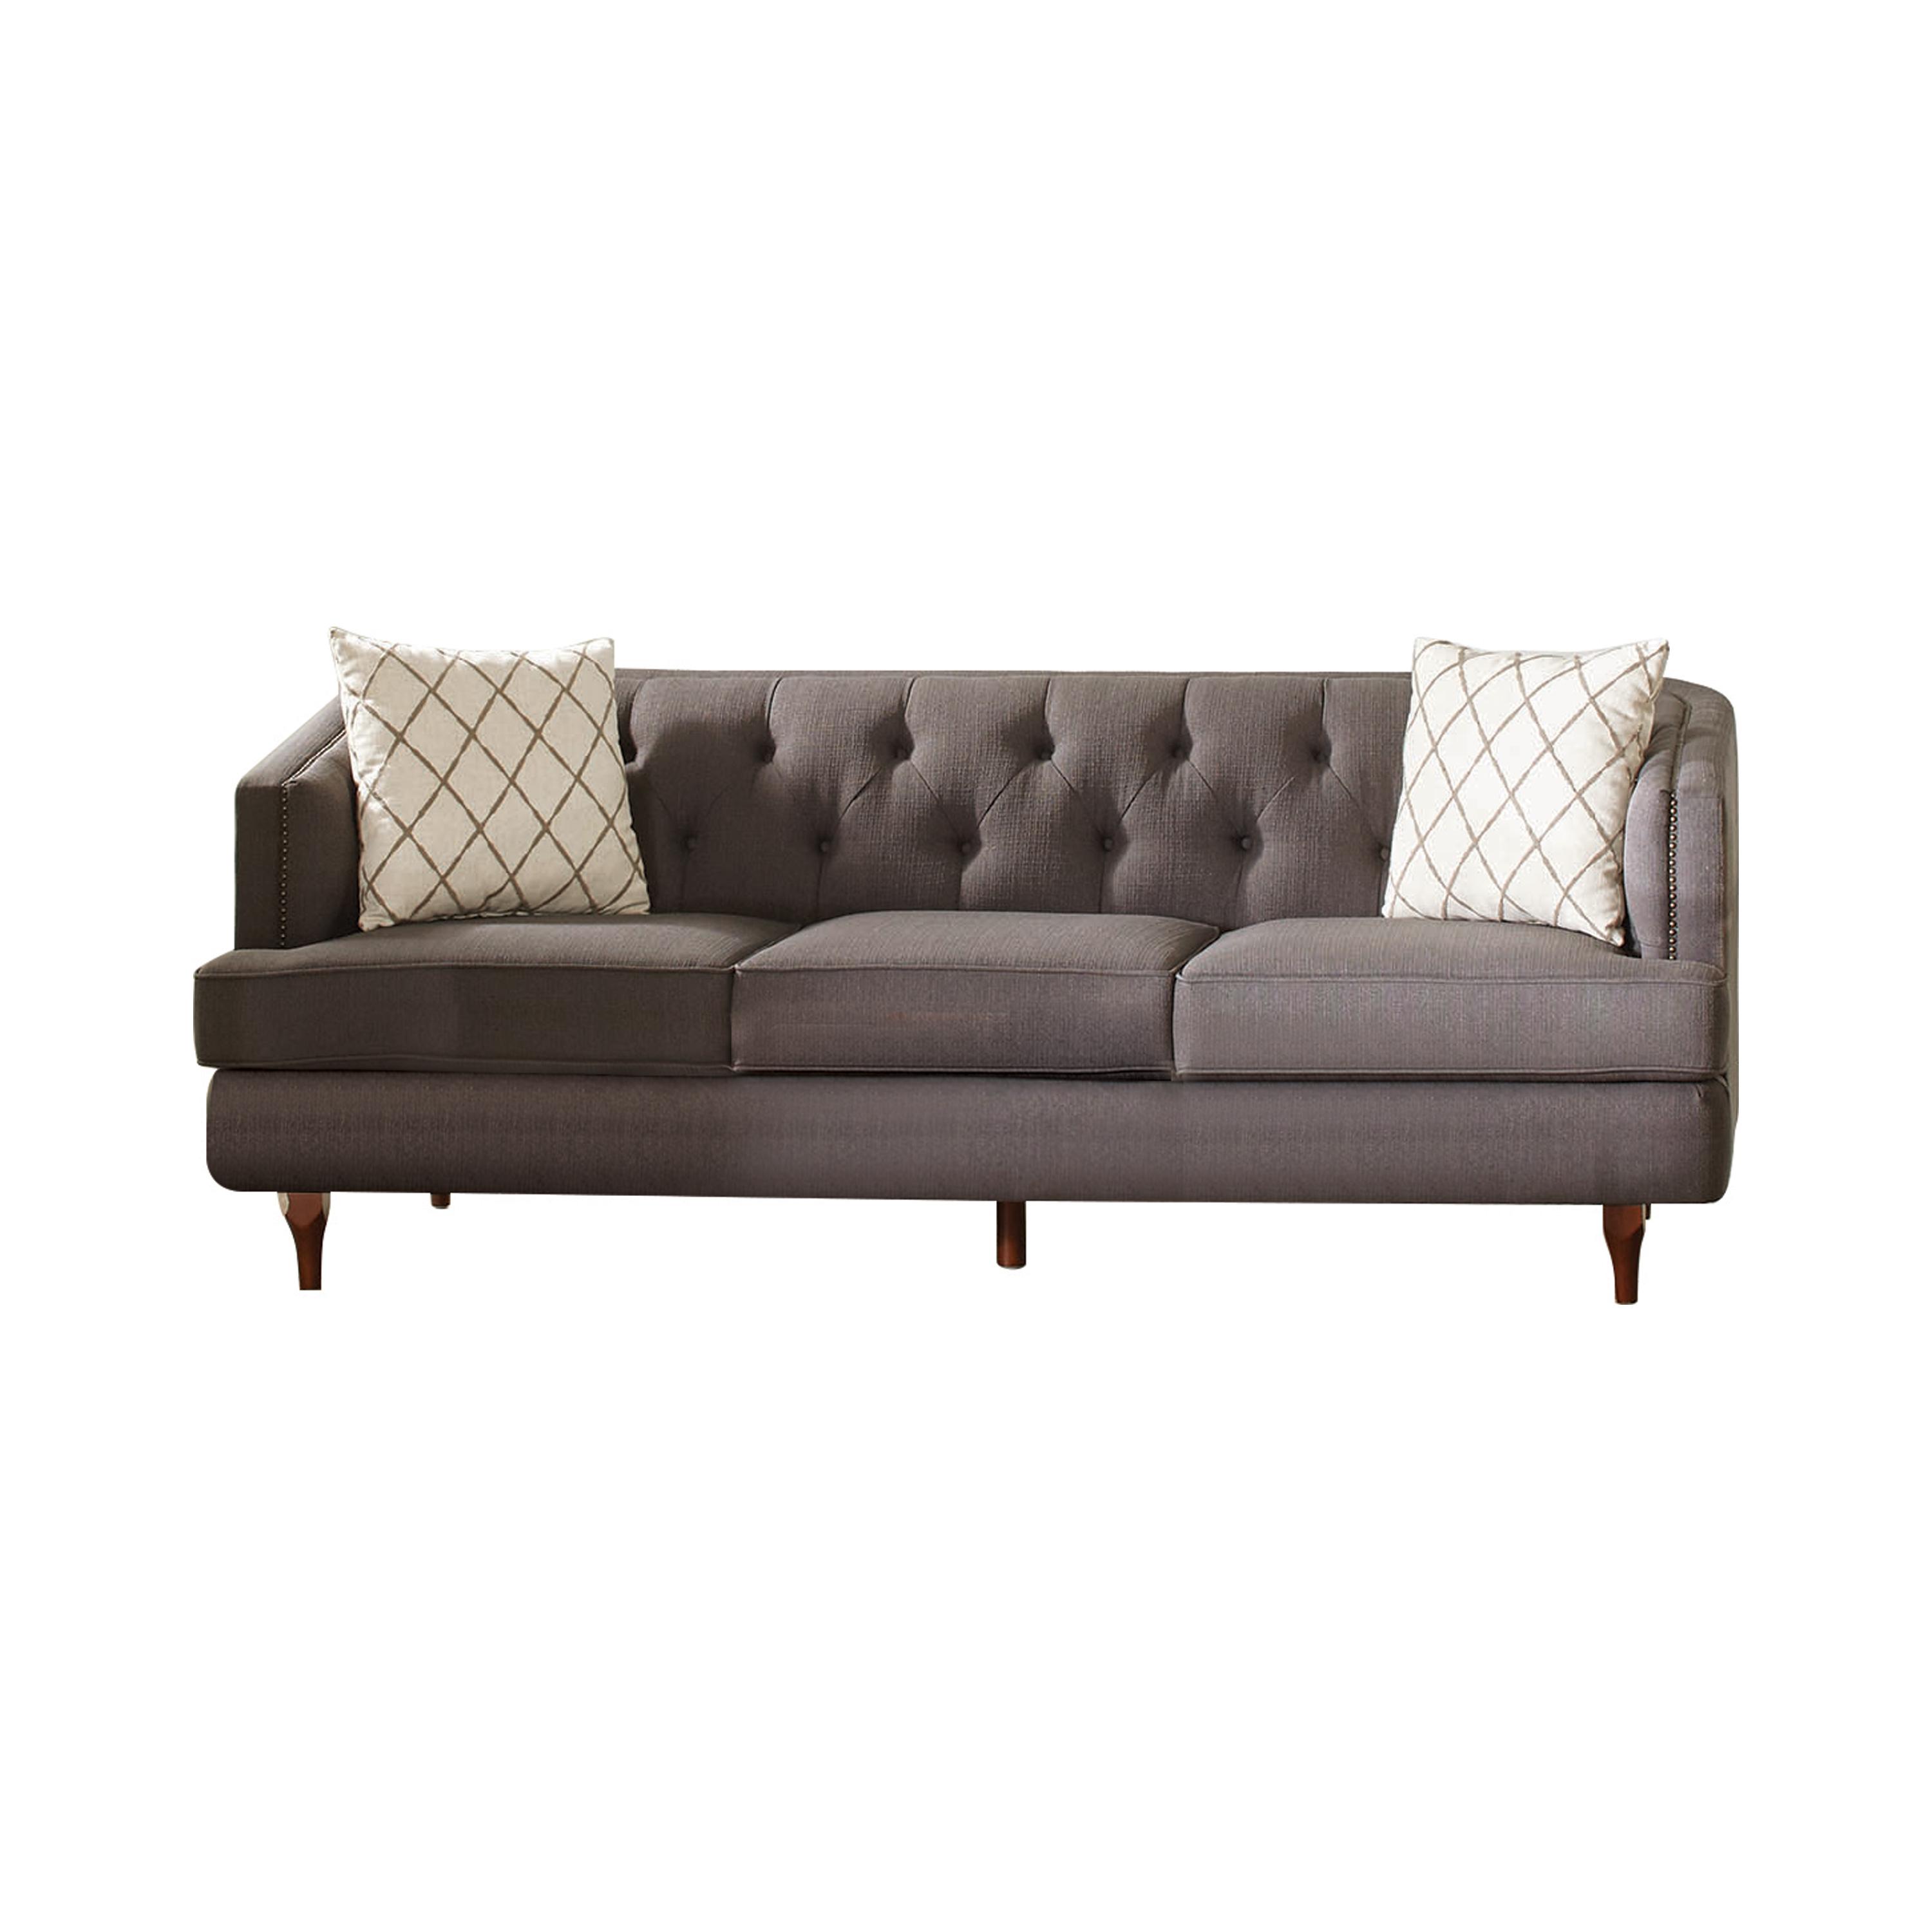 Transitional Sofa 508951 Shelby 508951 in Gray 